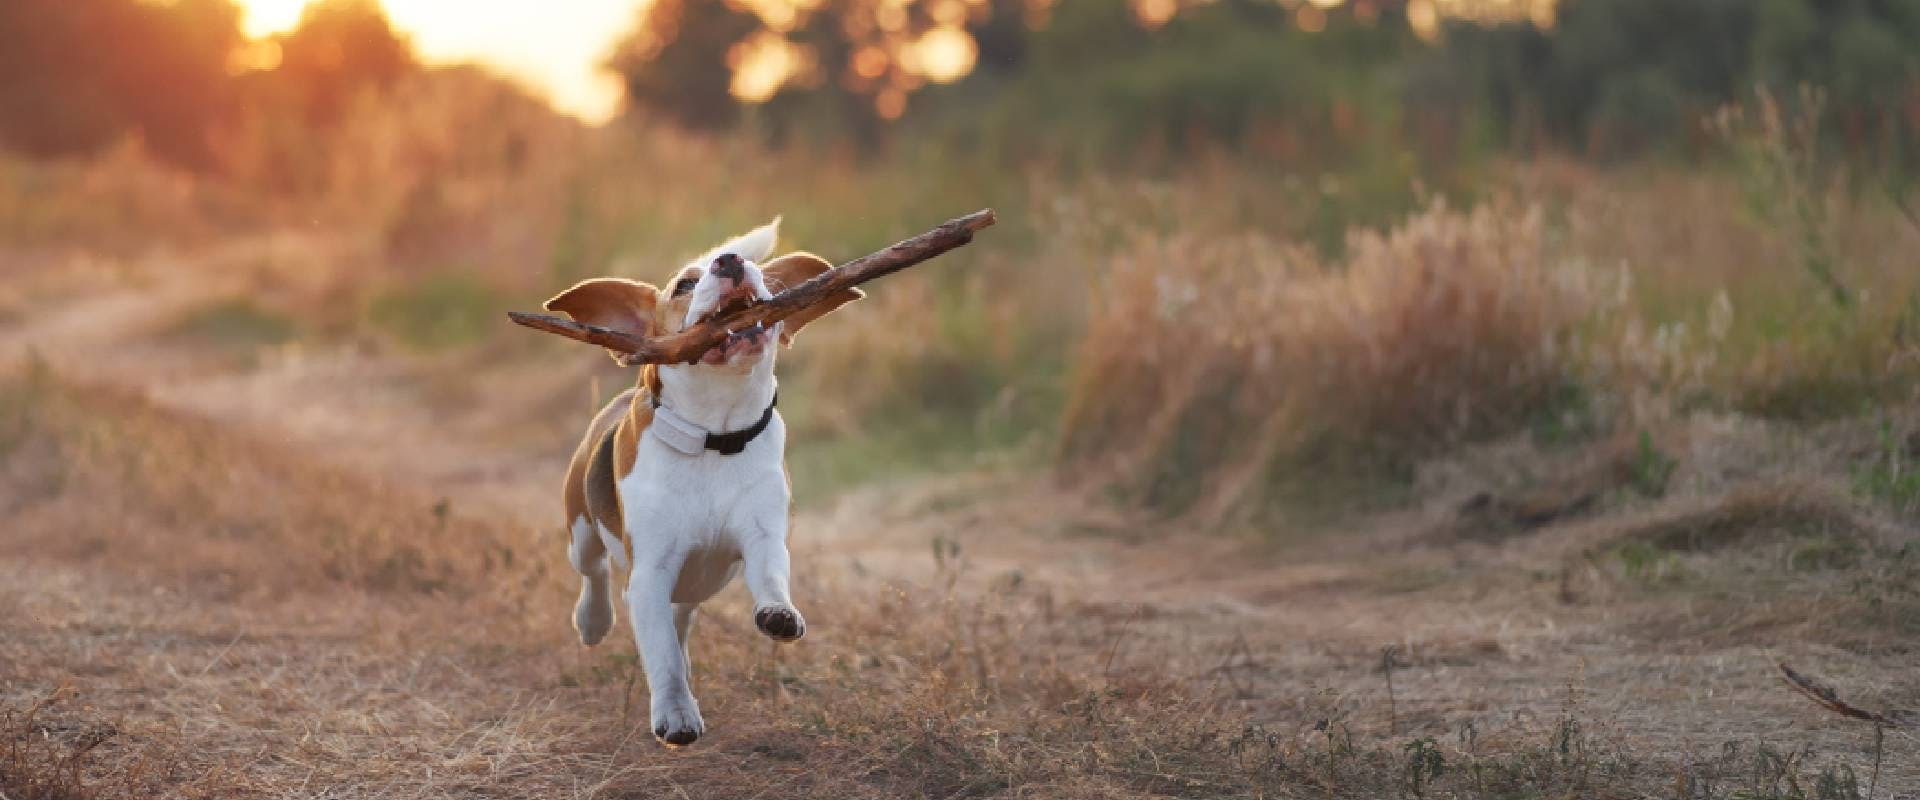 dog running with a stick in their mouth